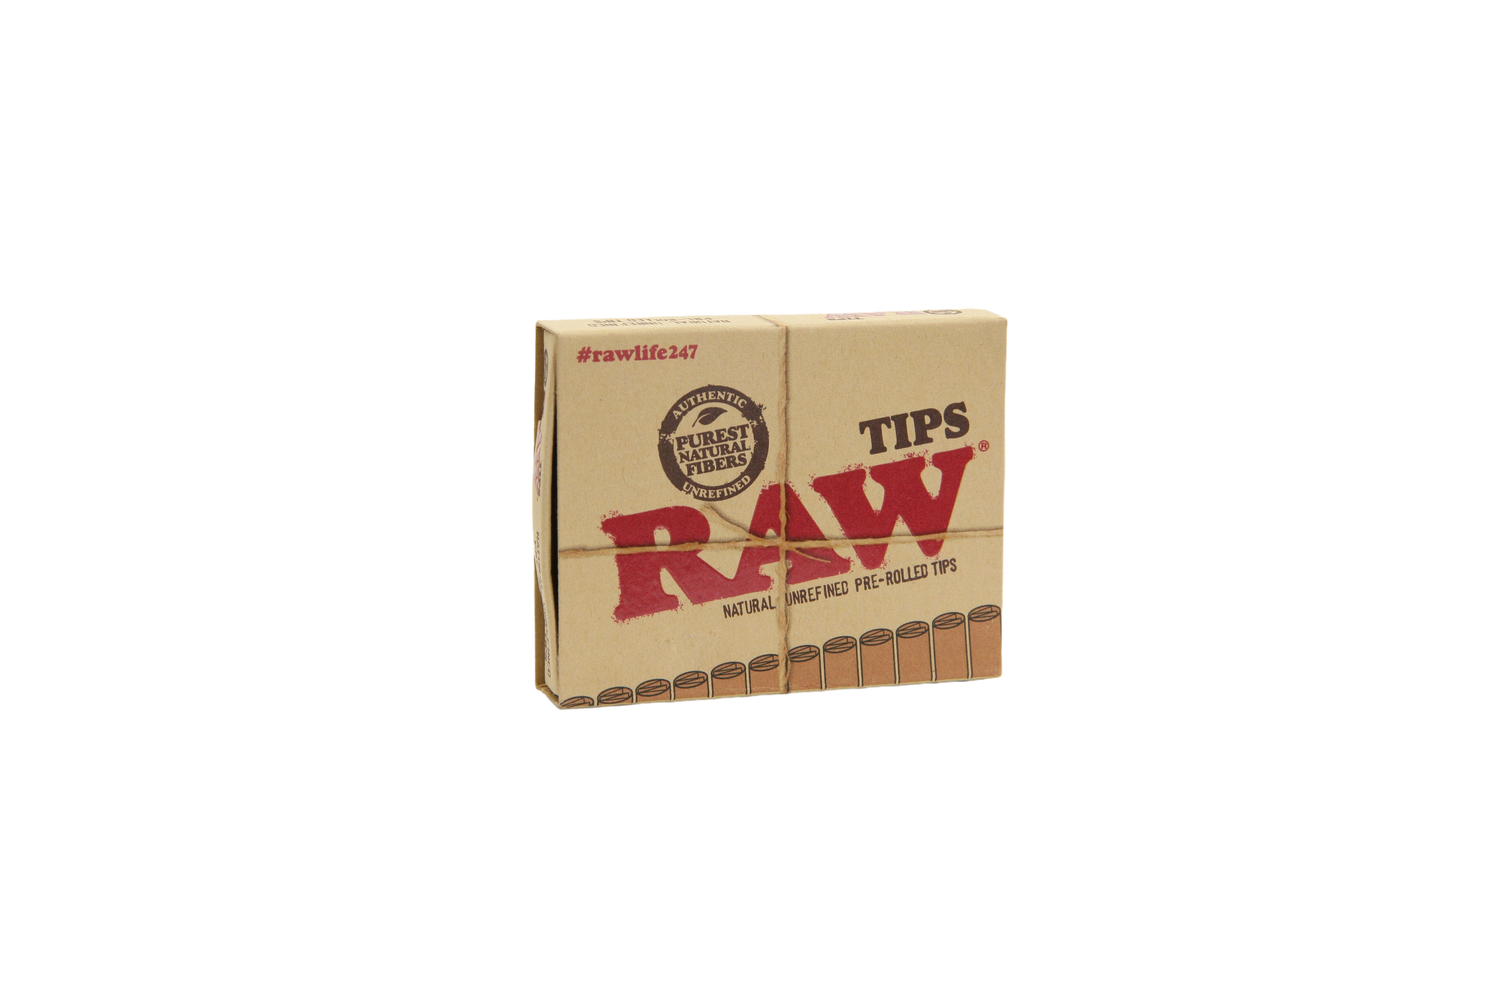 Raw Natural Unrefined Pre-Rolled Tips